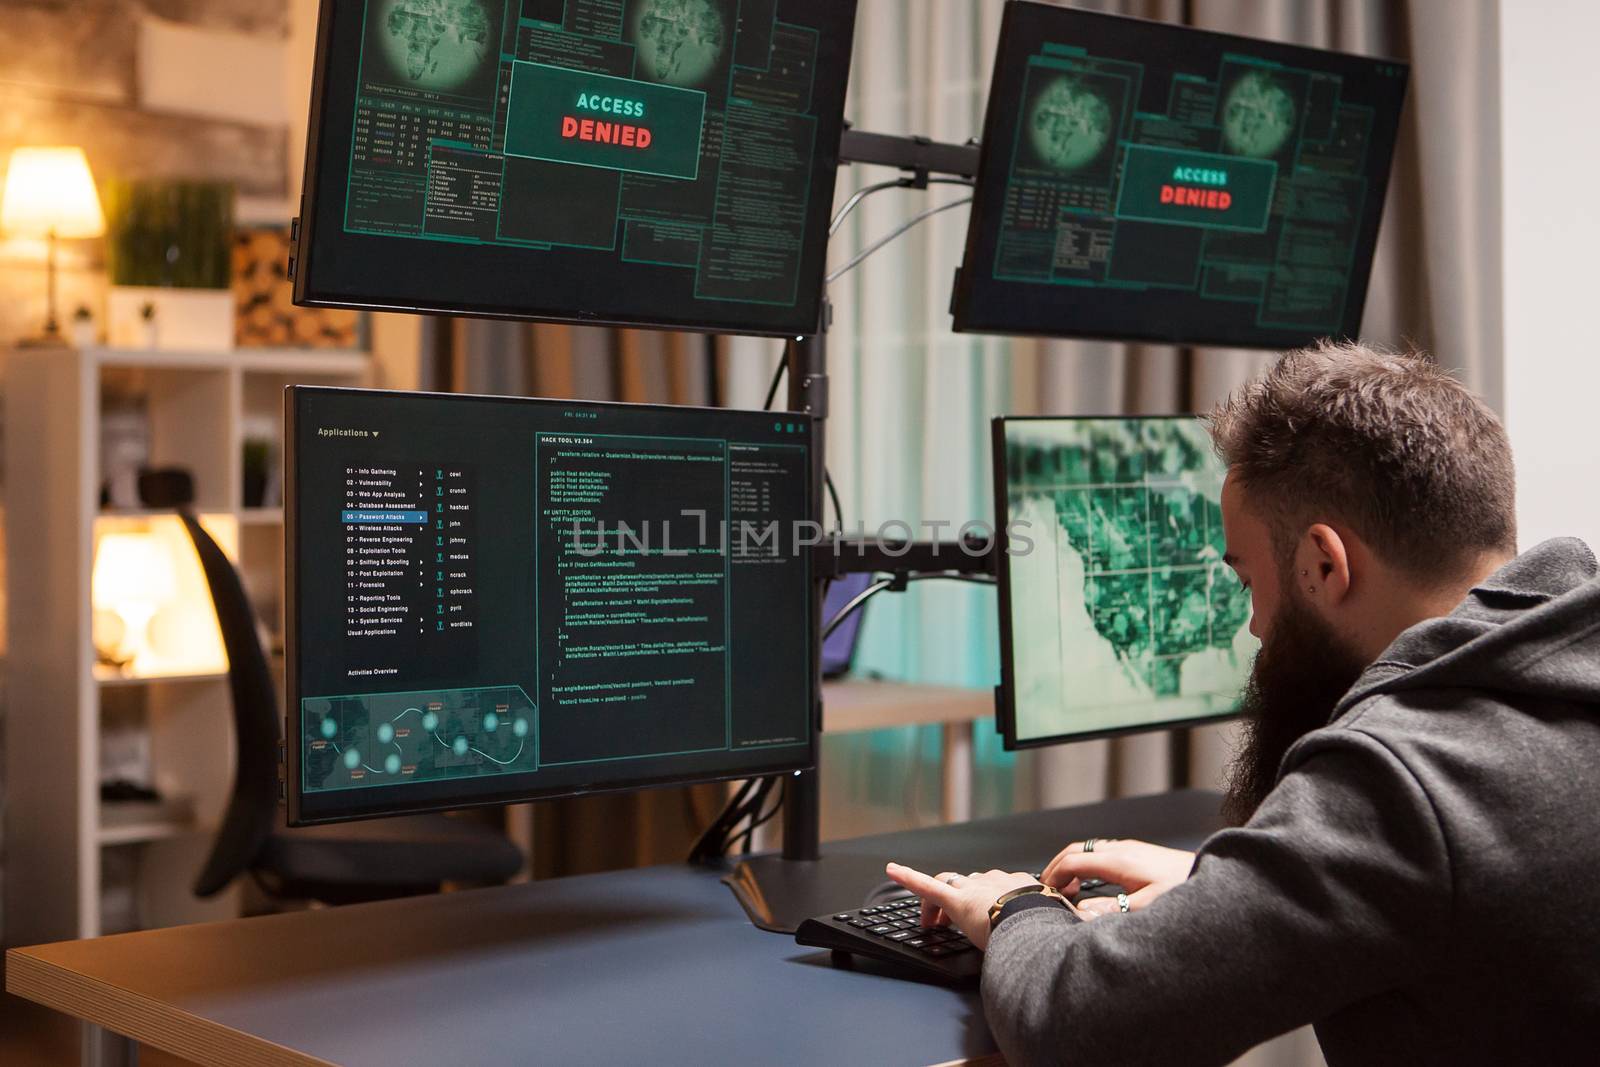 Bearded cyber terrorist gets access while typing a virus by DCStudio